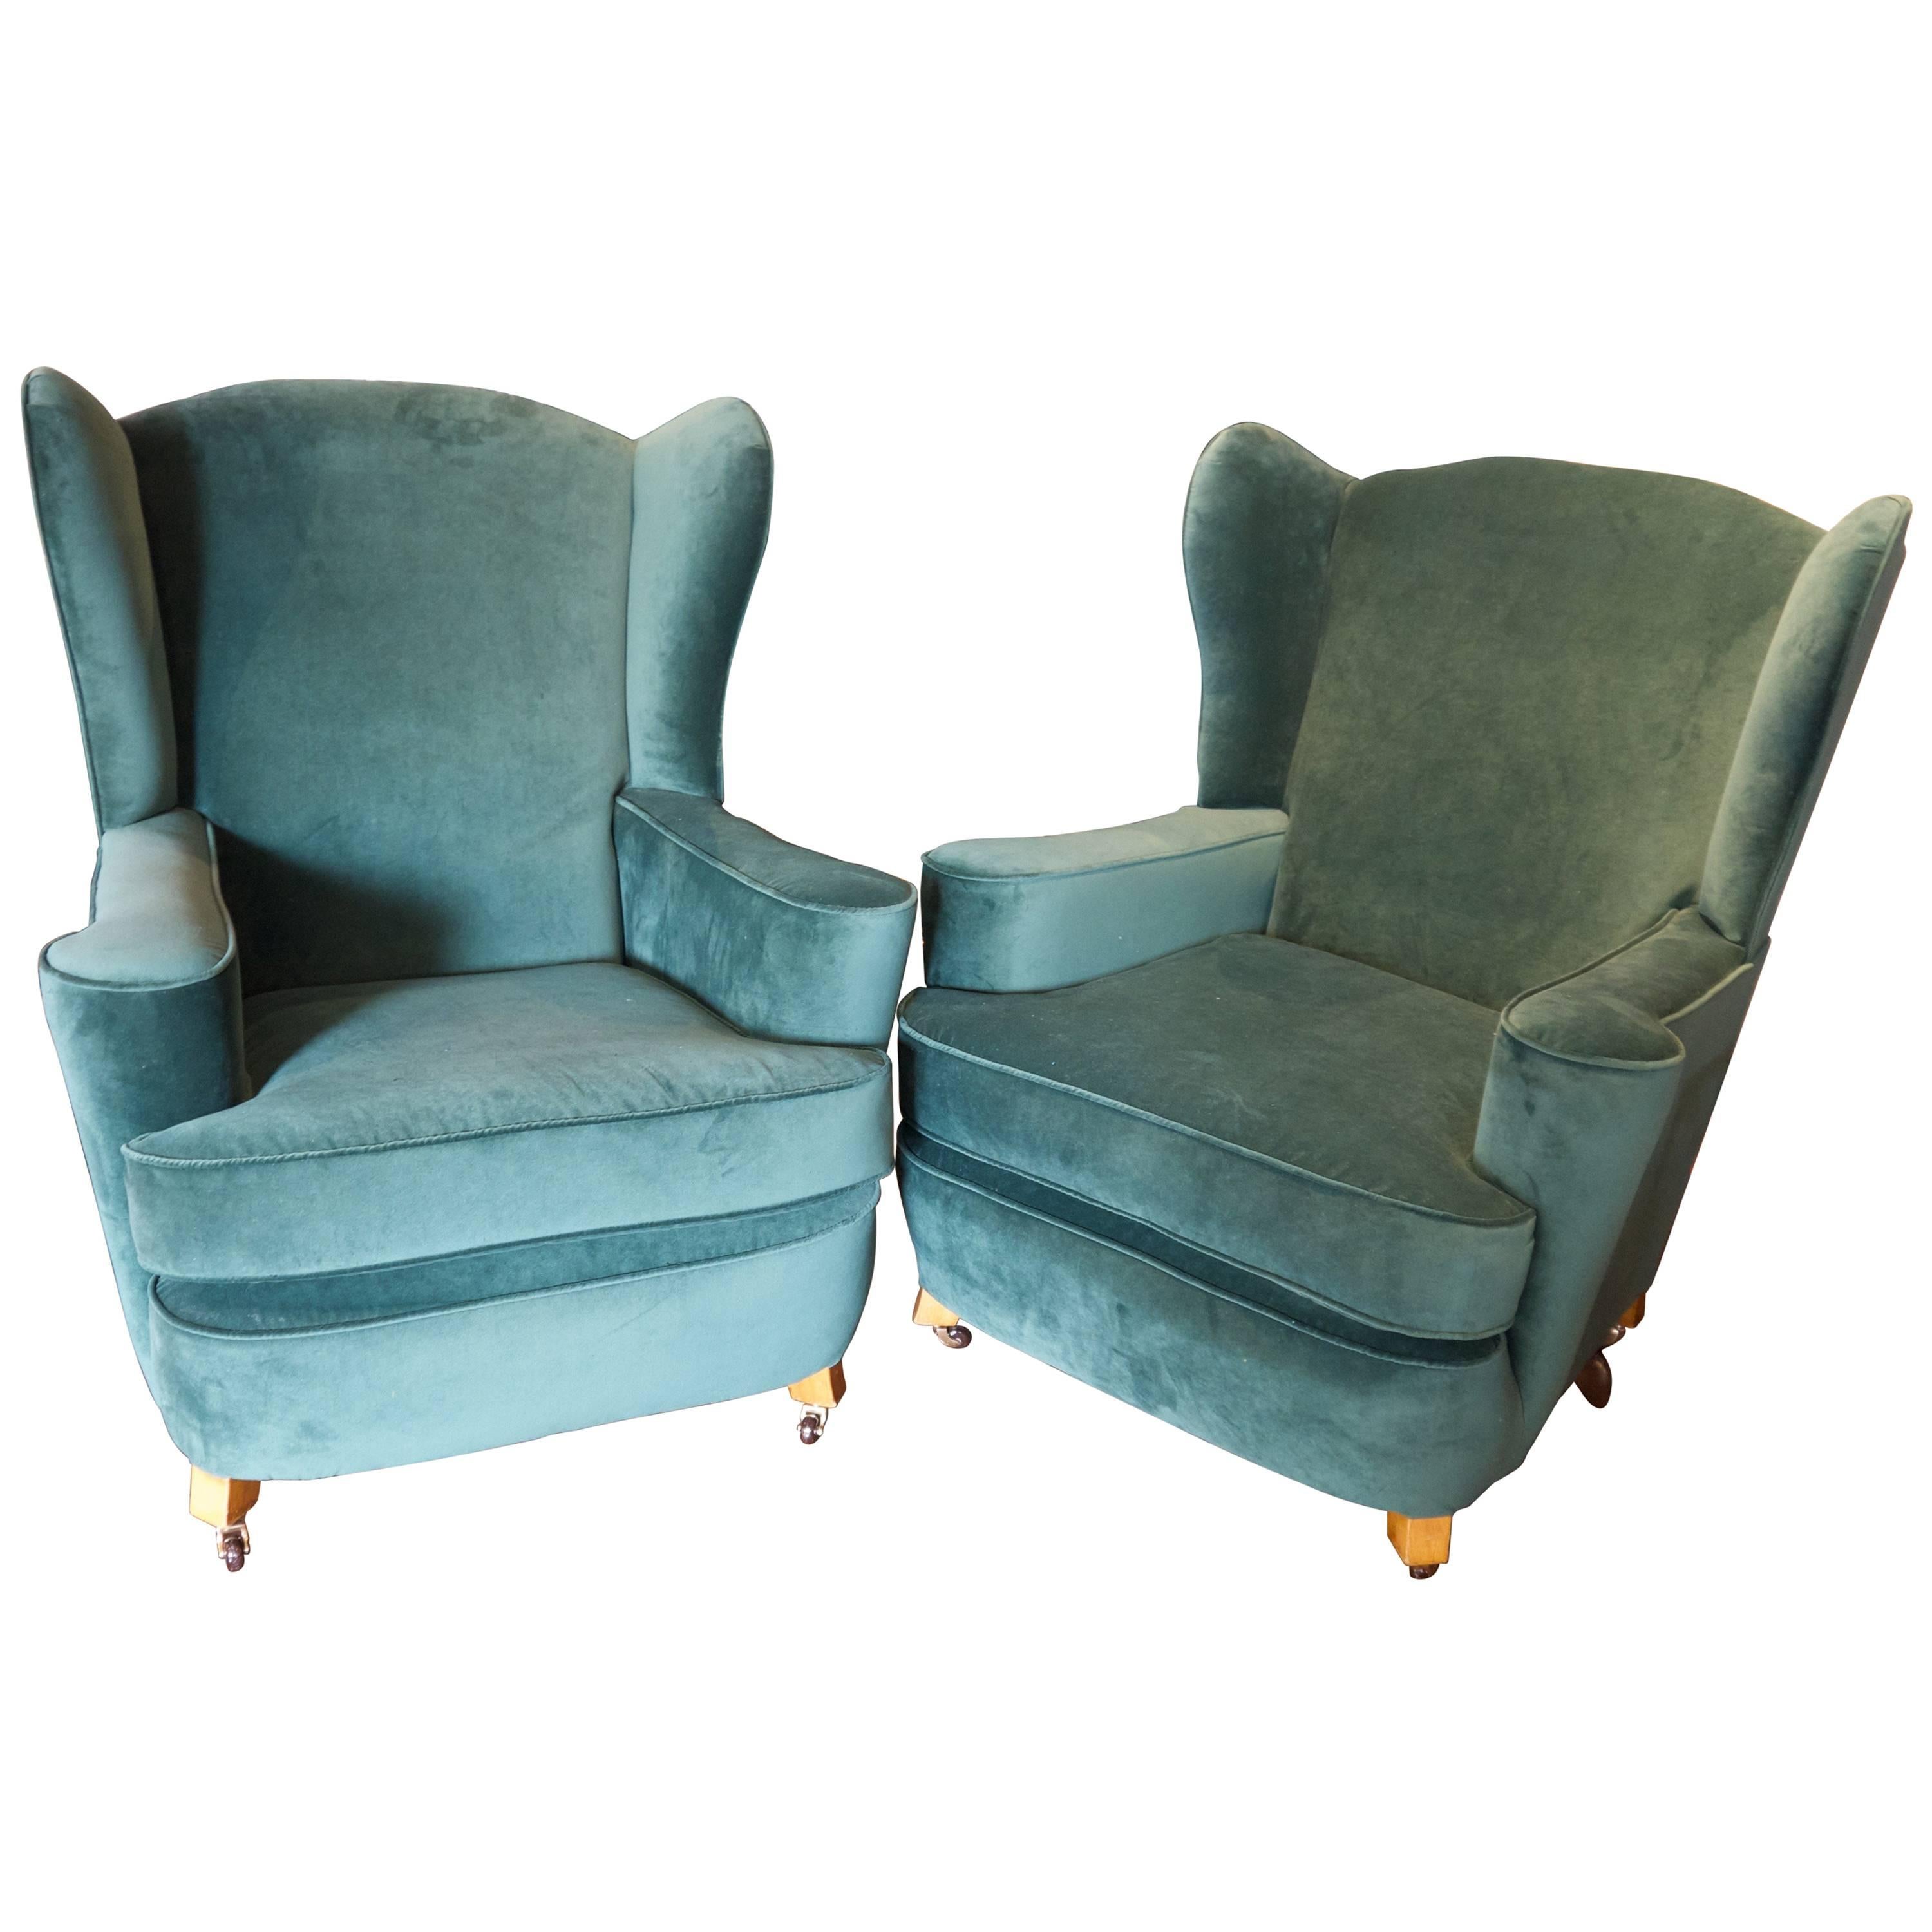 Pair of 1950s German Armchairs For Sale